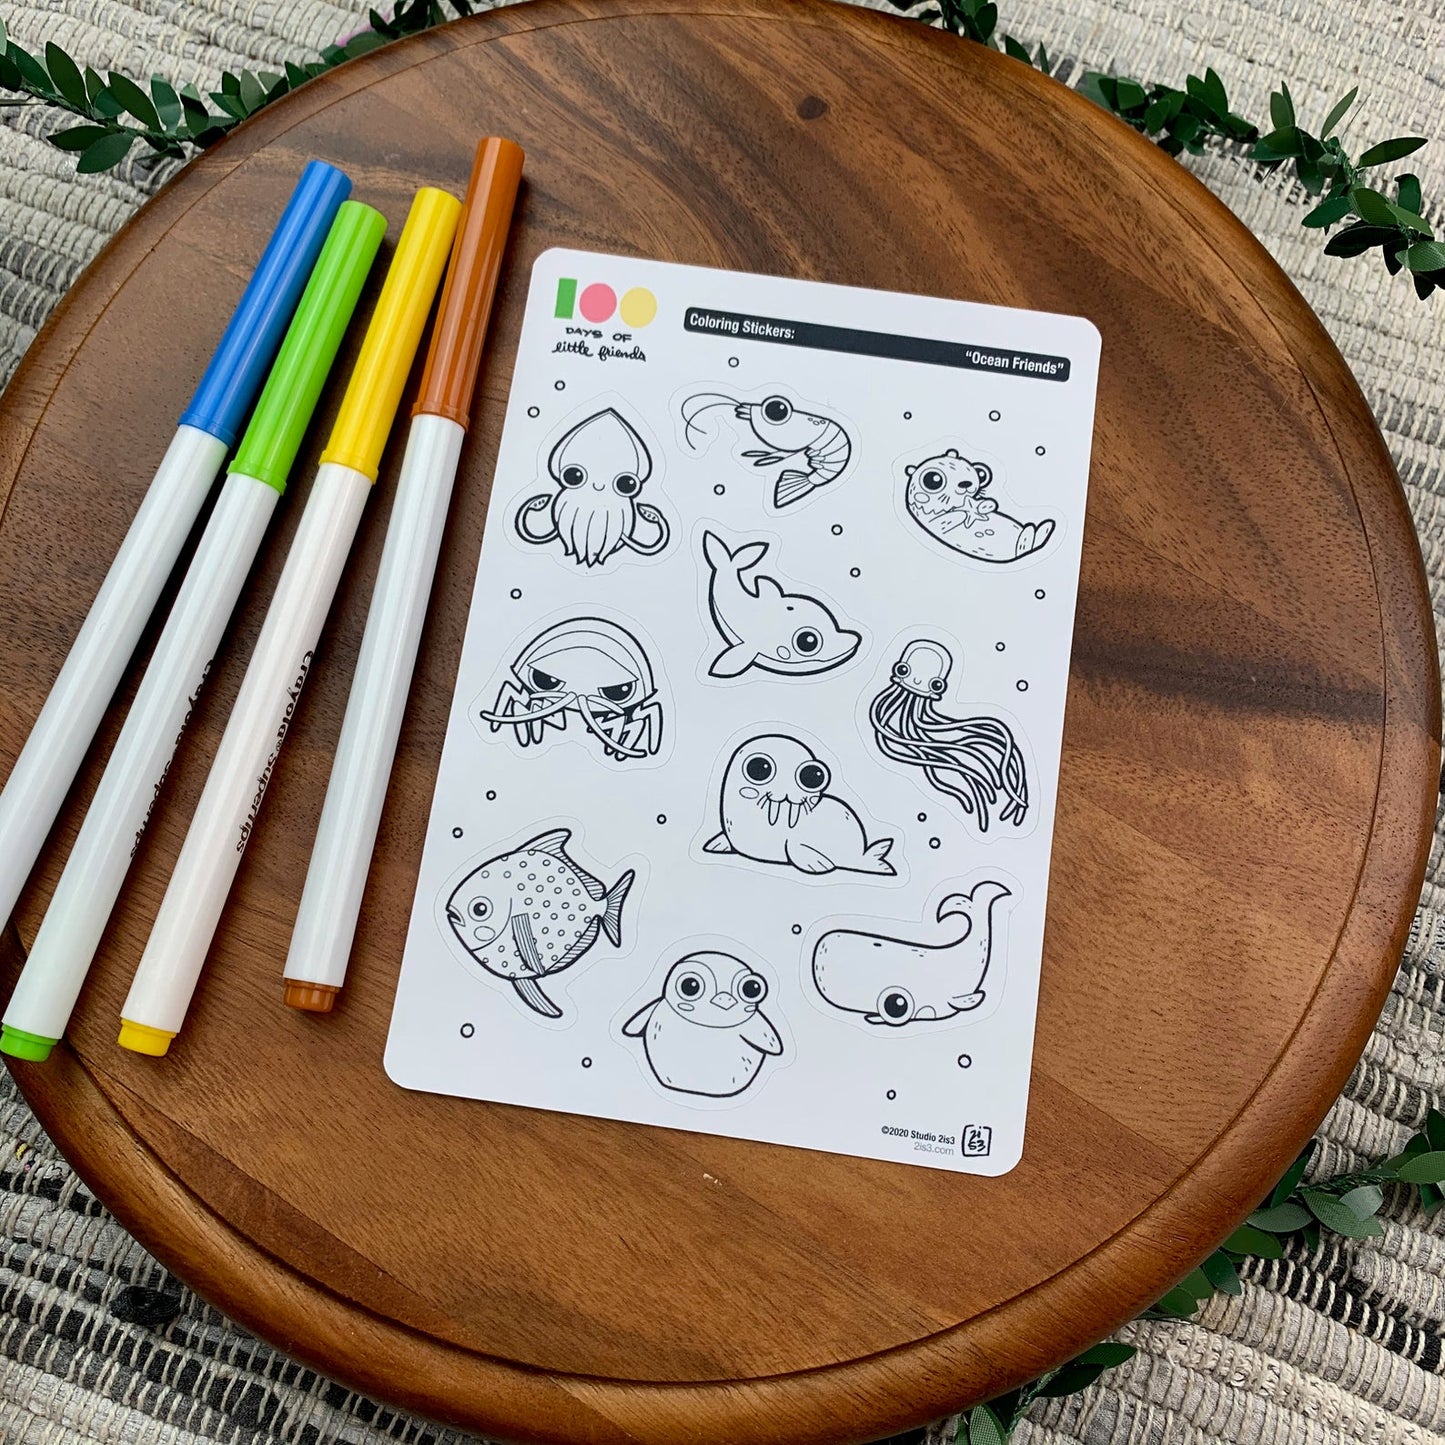 Markers and a sticker sheet with 10 little animal stickers on it. A Squid, Shrimp, Otter, Dolphin, Isopod, Walrus, Jellyfish, Opah, Penguin, and Whale.